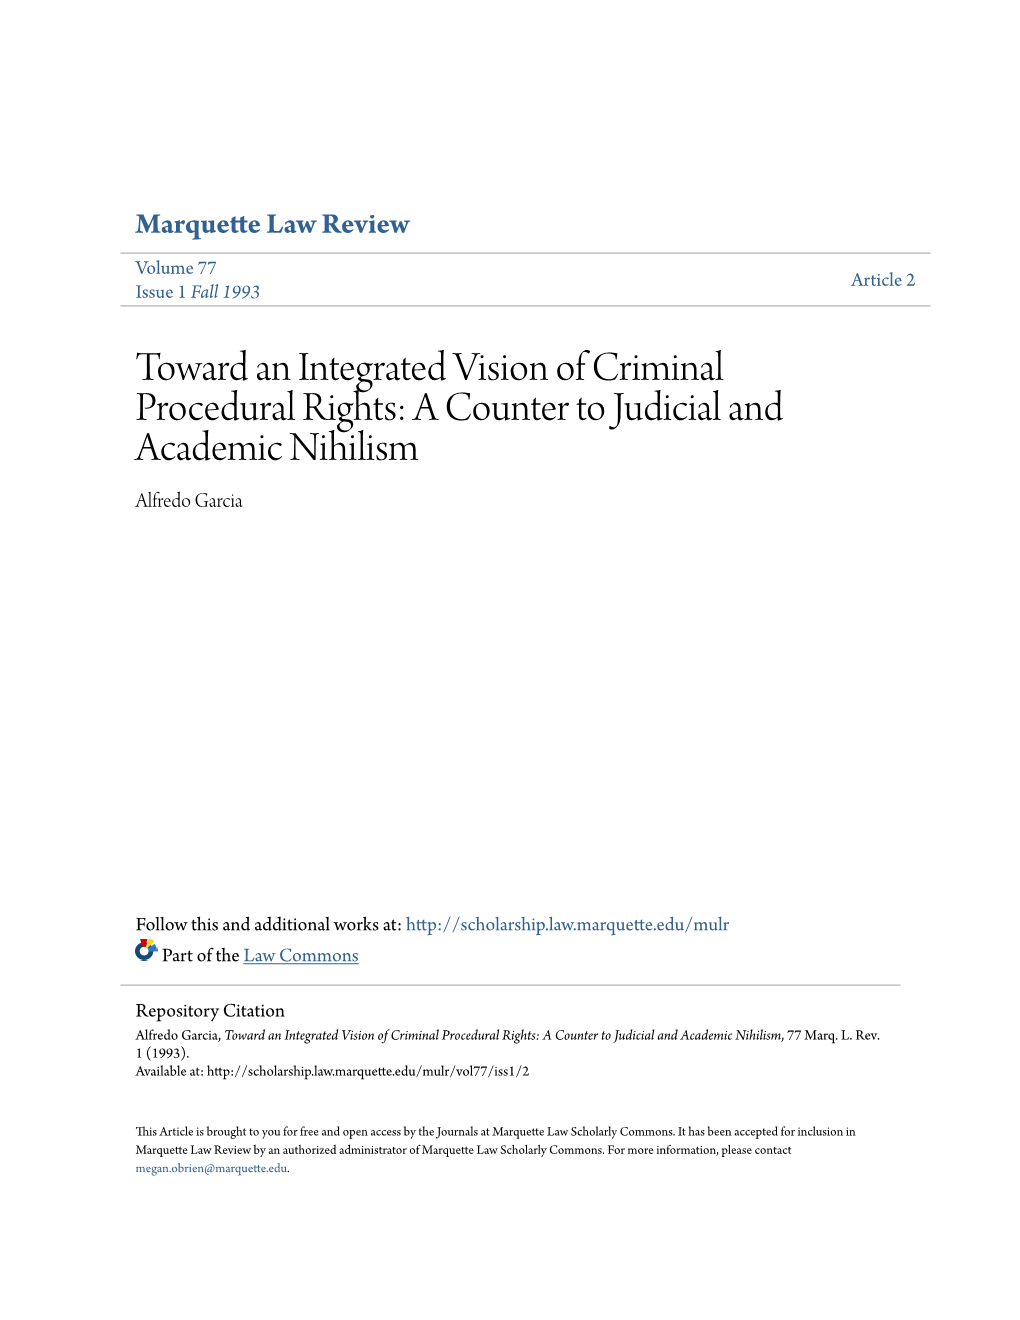 Toward an Integrated Vision of Criminal Procedural Rights: a Counter to Judicial and Academic Nihilism Alfredo Garcia